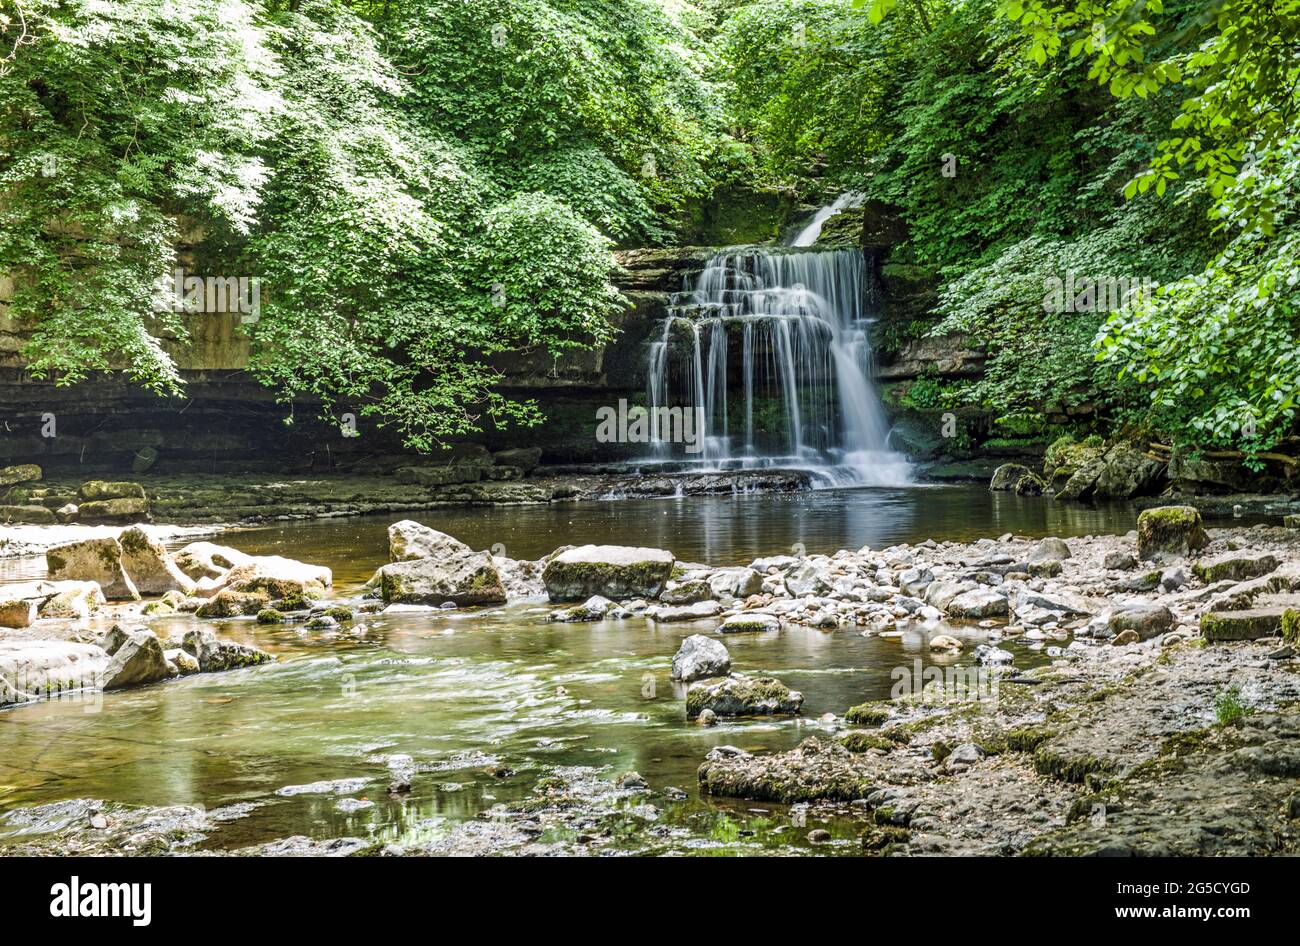 West Burton Waterfall West Burton a Bishopdale vicino a Wensleydale nel Yorkshire Dales National Park Foto Stock